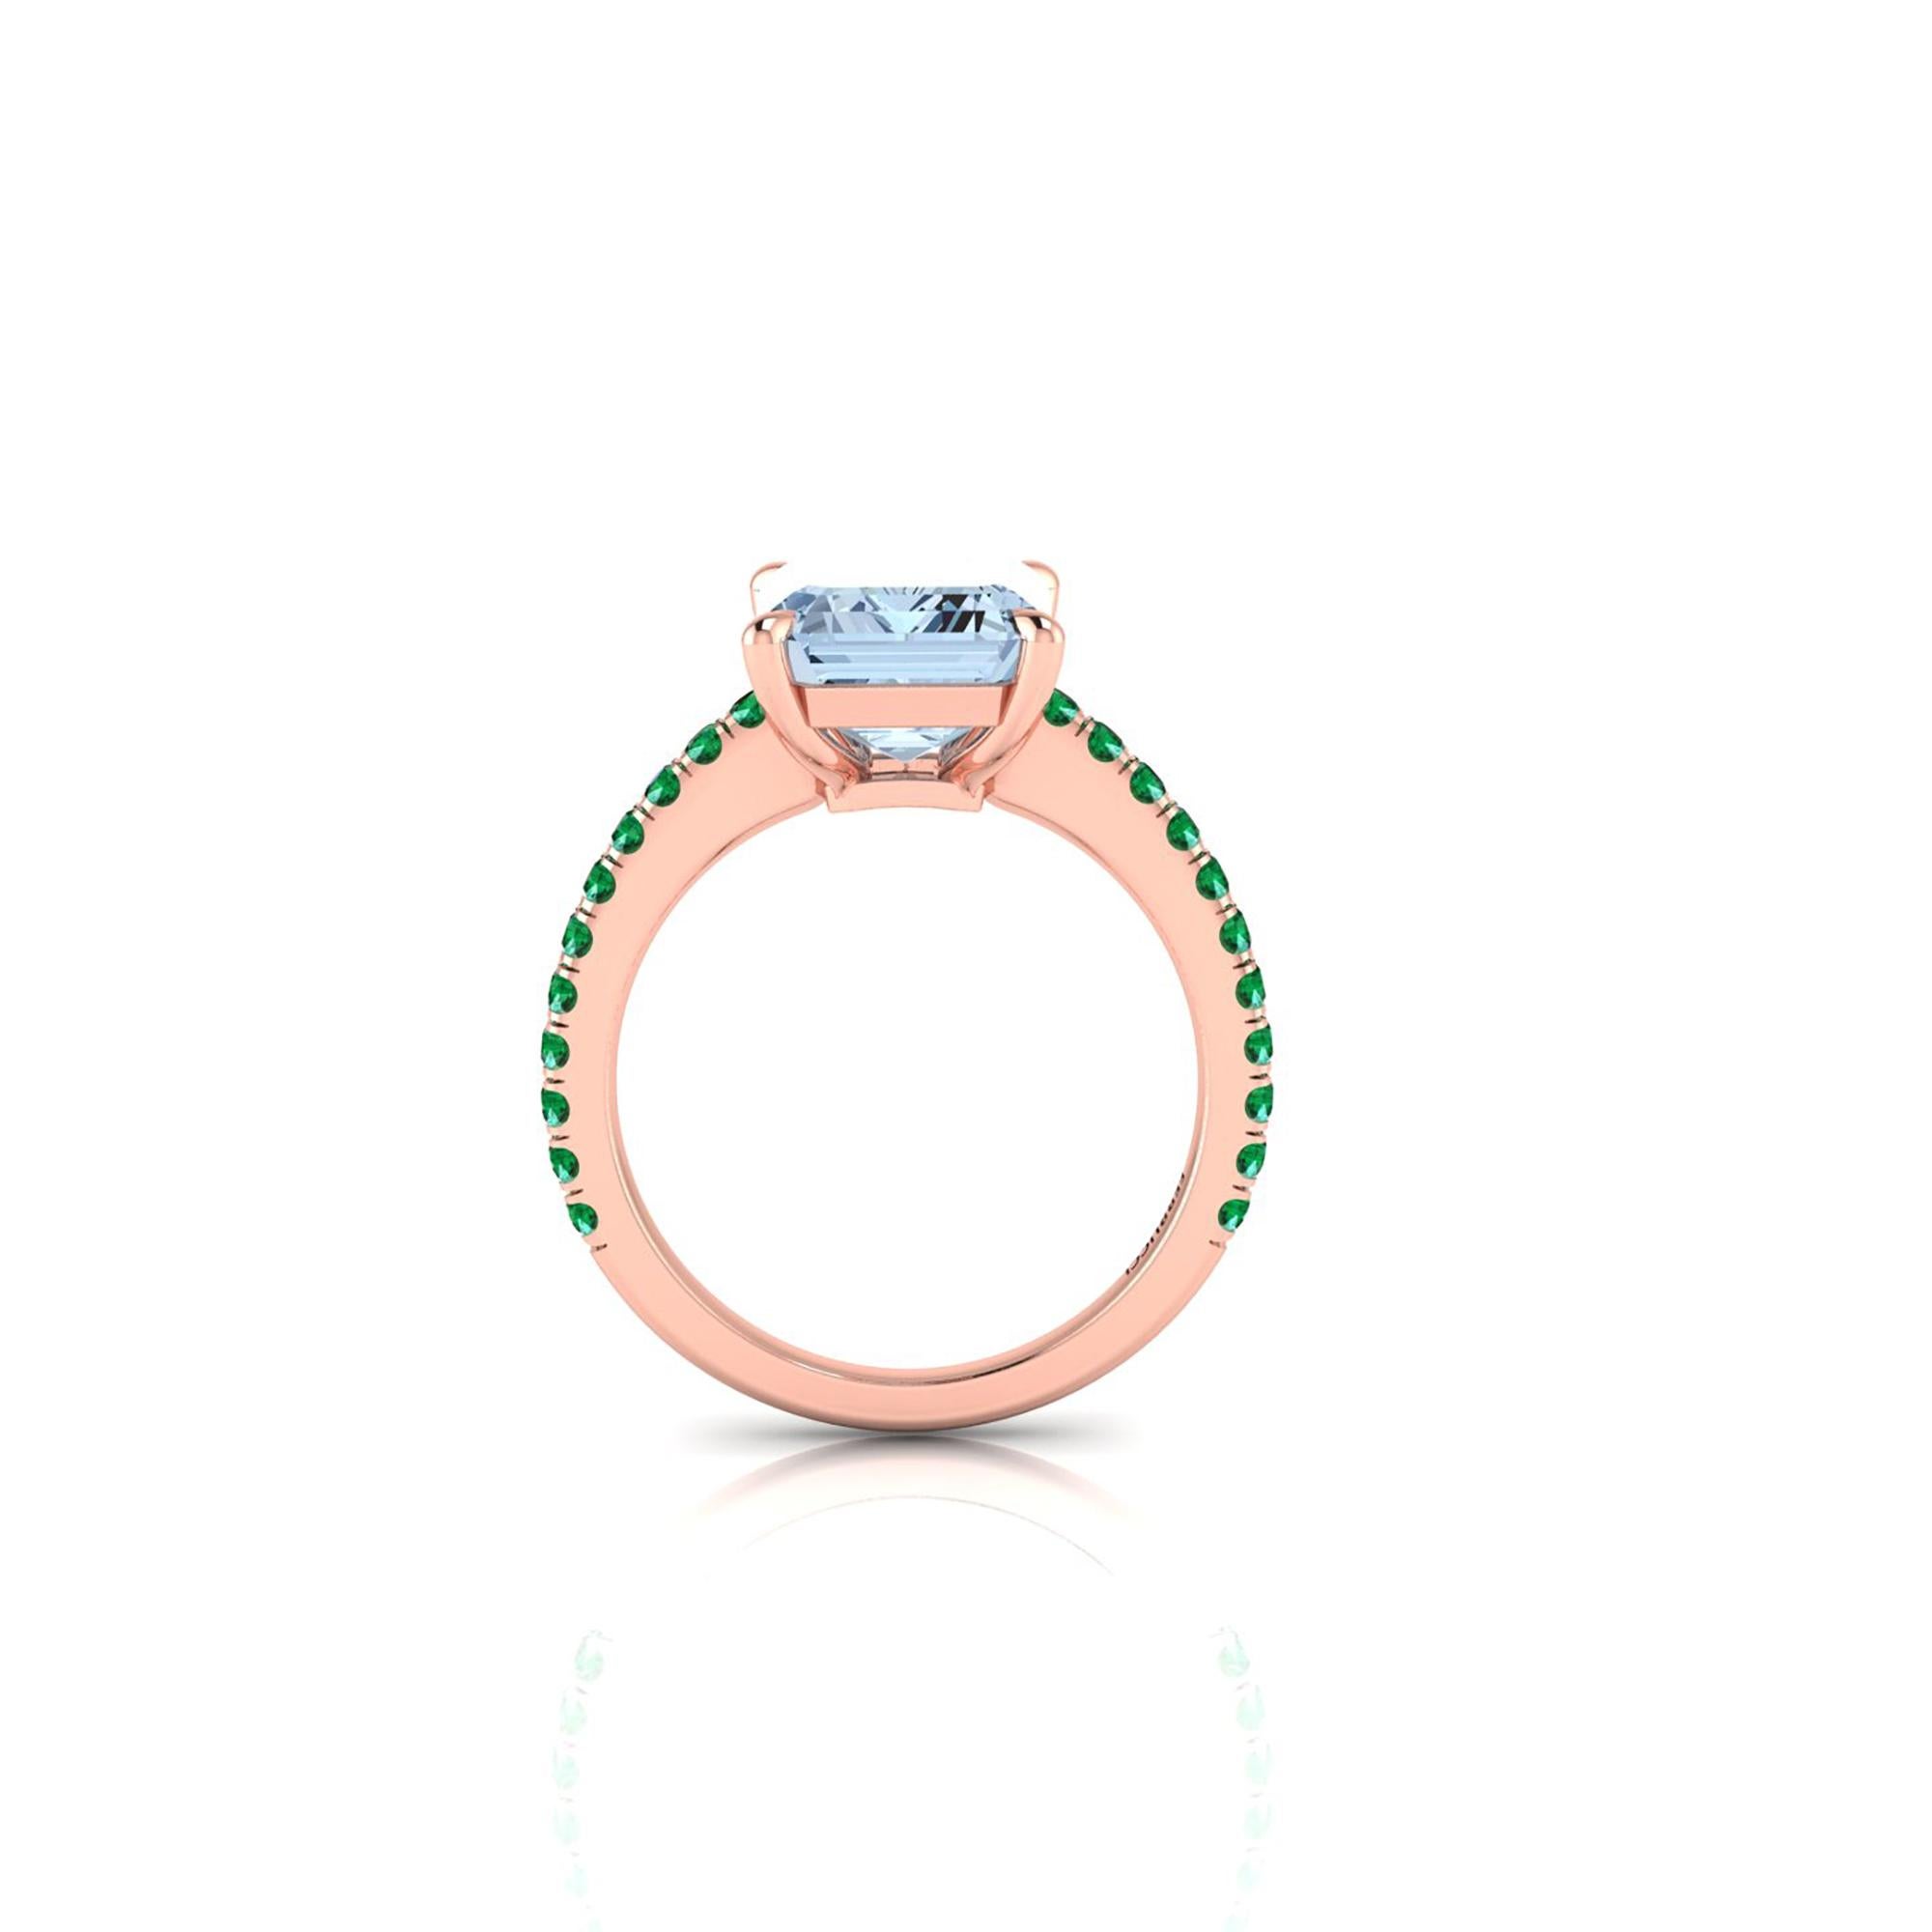 An exquisite 4.61 carat Aquamarine, emerald cut, very high quality color, eye clean gem, accompanied a pave' of bright green Emeralds of approximately  total carat weight of 0.35 carat, set in an hand crafted, delicate and sophisticated looking 18k